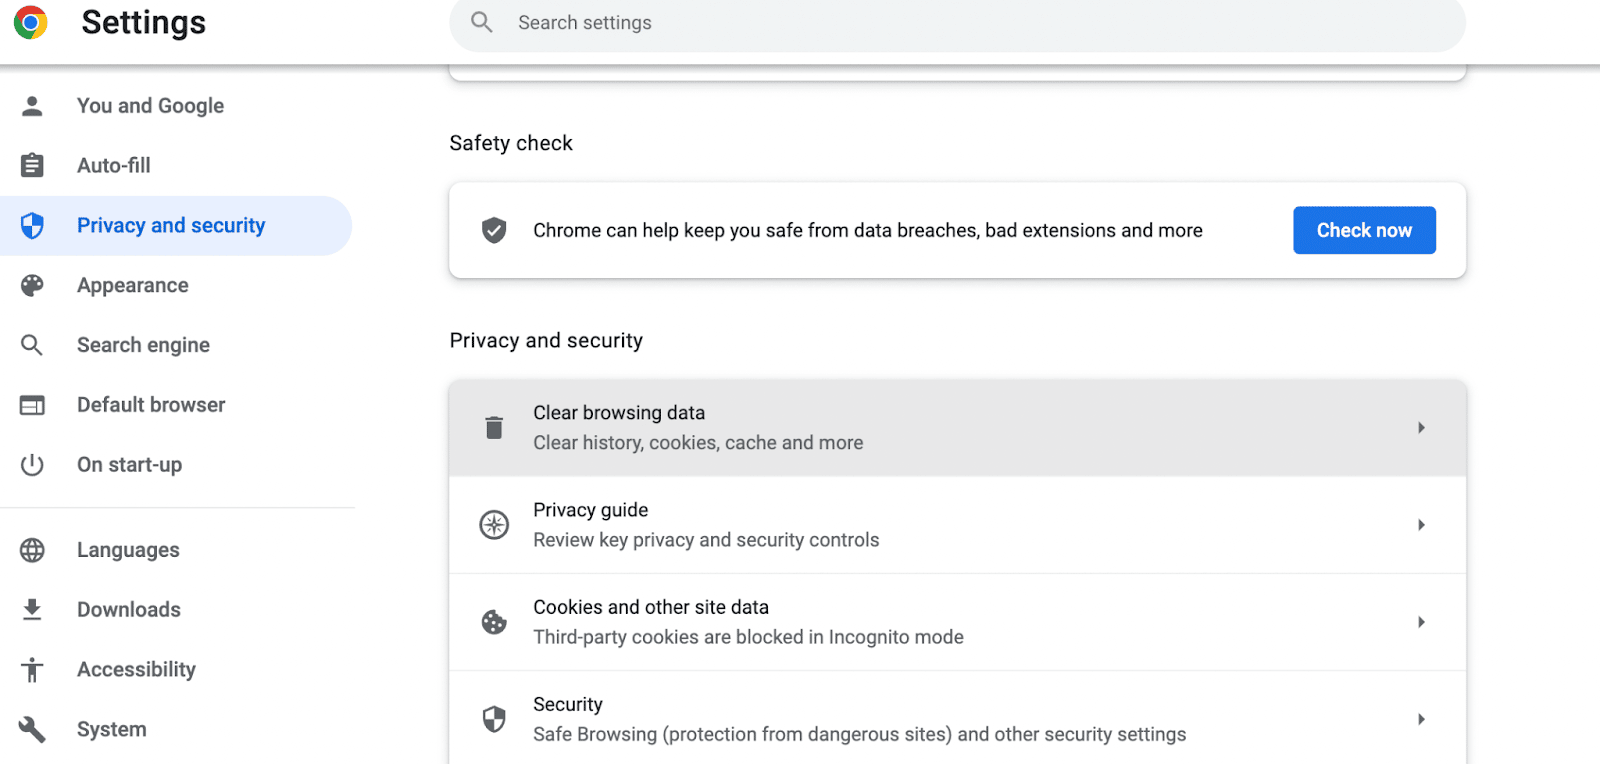 Find privacy and security and clear browsing data in Google Chrome